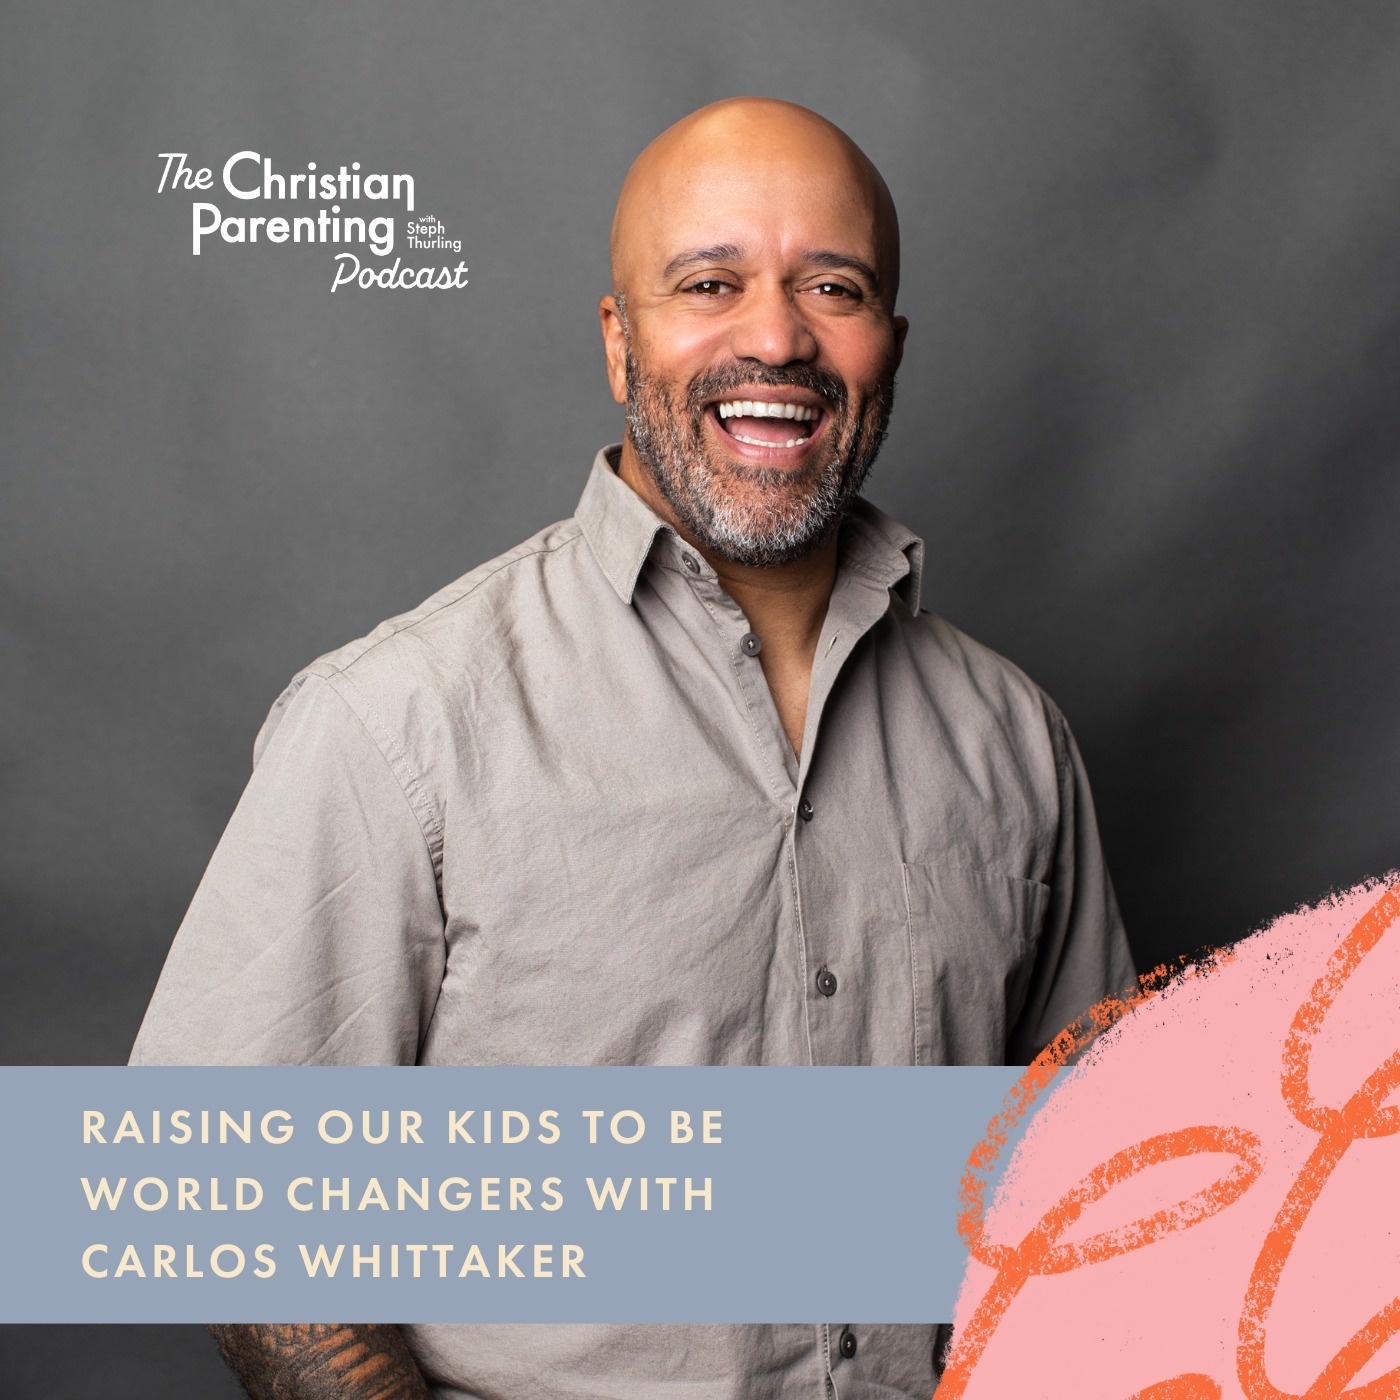 Raising our kids to be world changers with Carlos Whittaker